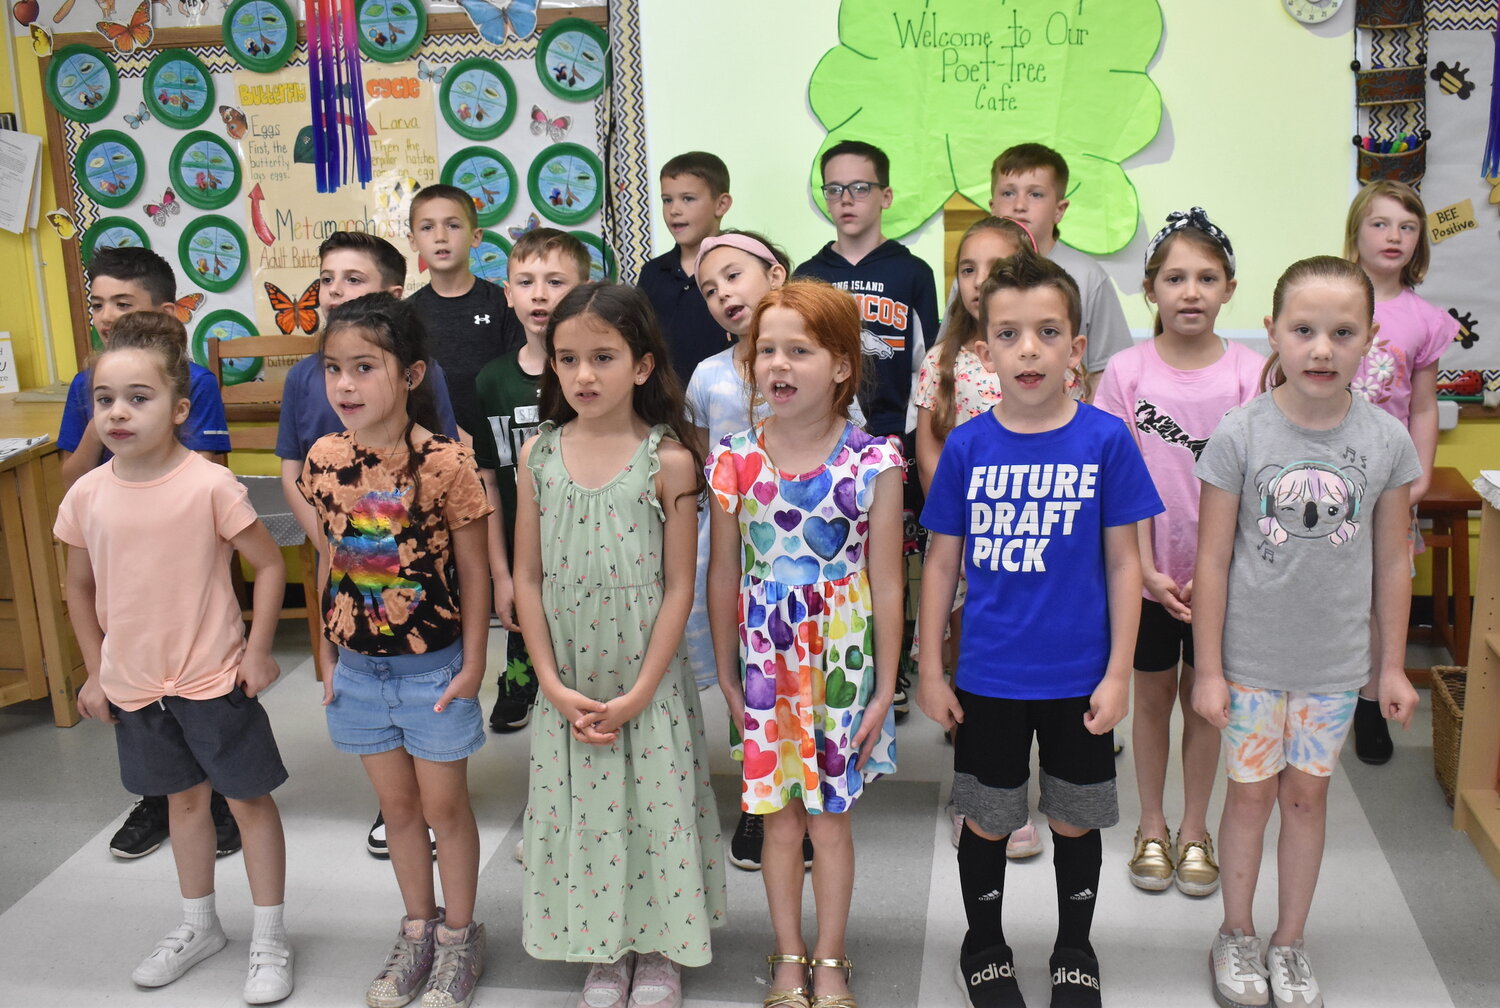 Second graders in AnneMarie Motisi’s class at Seaford Manor Elementary School opened the Poetry Café on May 16 with a group performance.